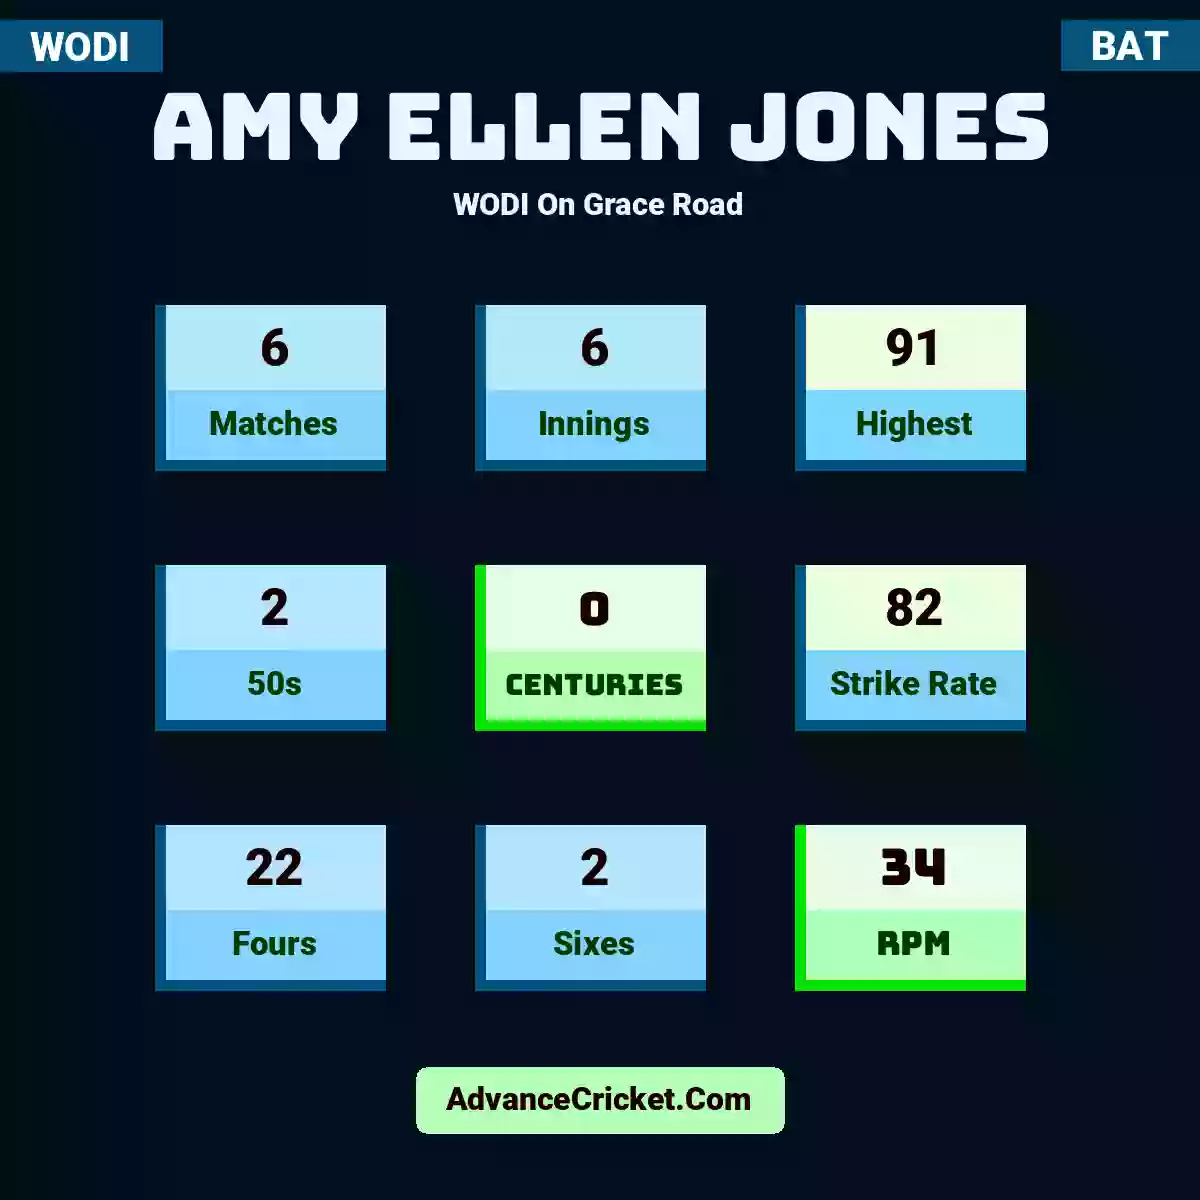 Amy Ellen Jones WODI  On Grace Road, Amy Ellen Jones played 6 matches, scored 91 runs as highest, 2 half-centuries, and 0 centuries, with a strike rate of 82. A.Jones hit 22 fours and 2 sixes, with an RPM of 34.